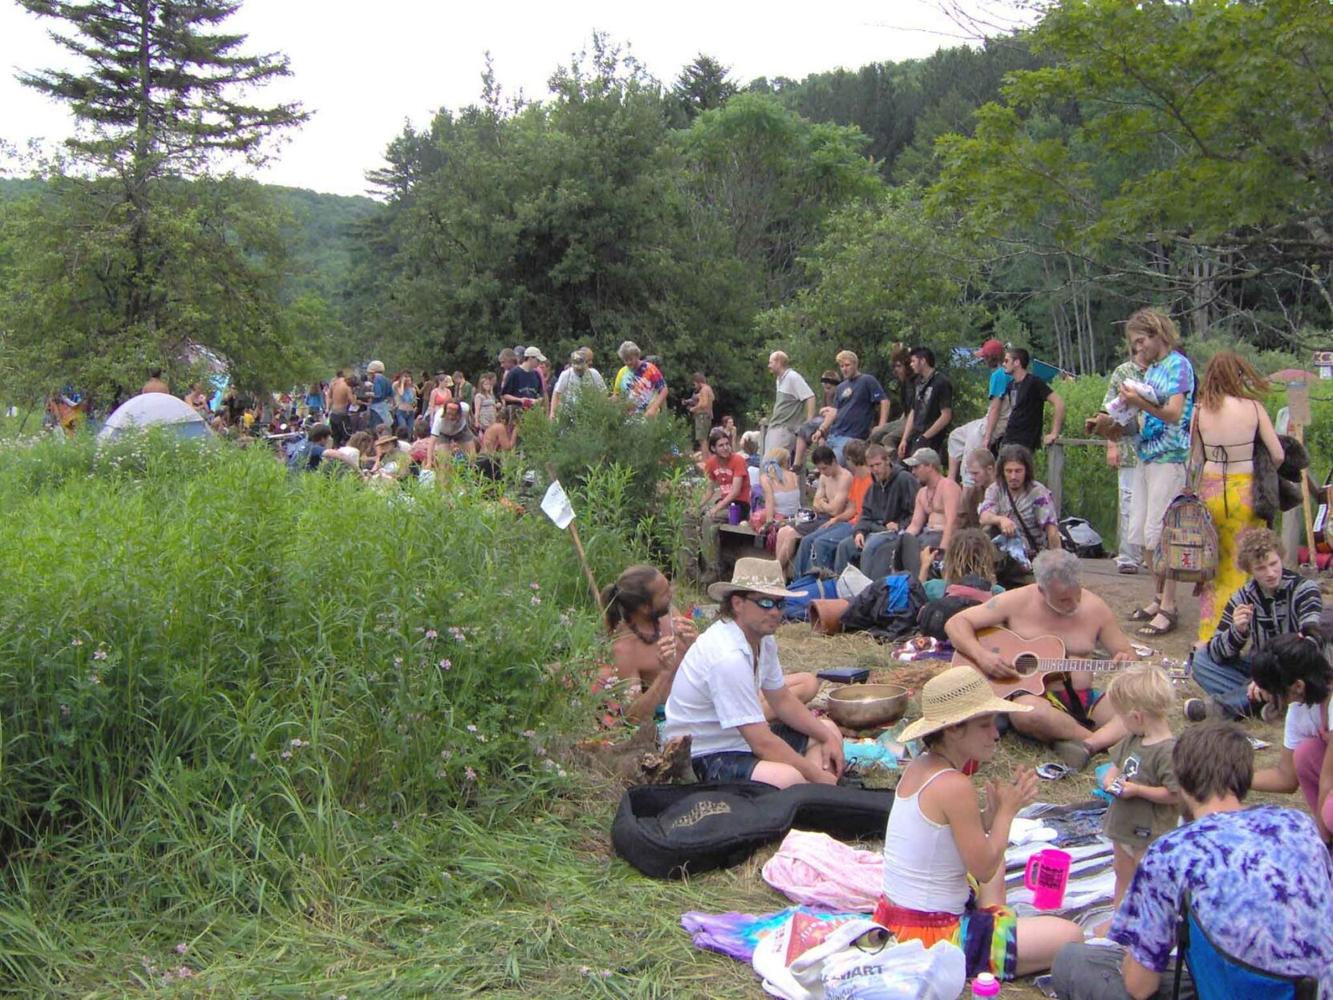 Update Taos Rainbow Gathering will be smaller "prism gathering" due to